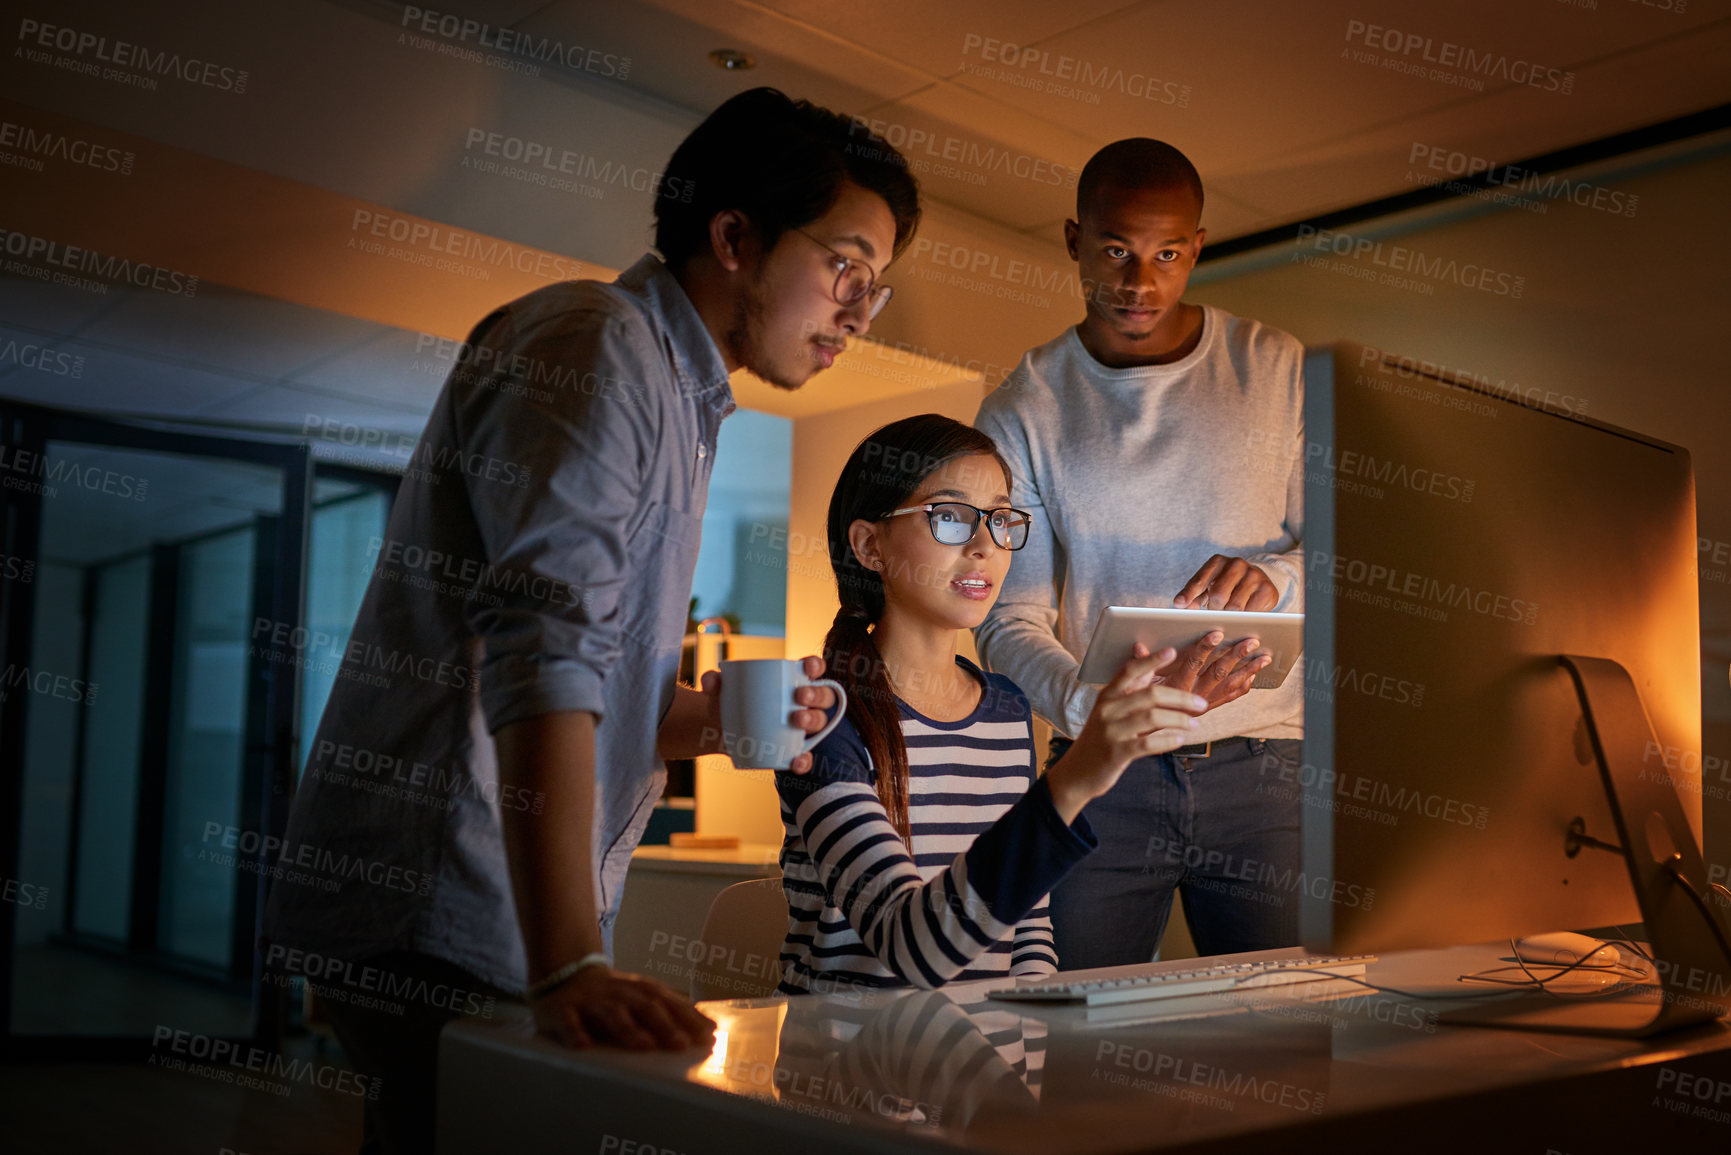 Buy stock photo Shot of computer programmers working together late in the office